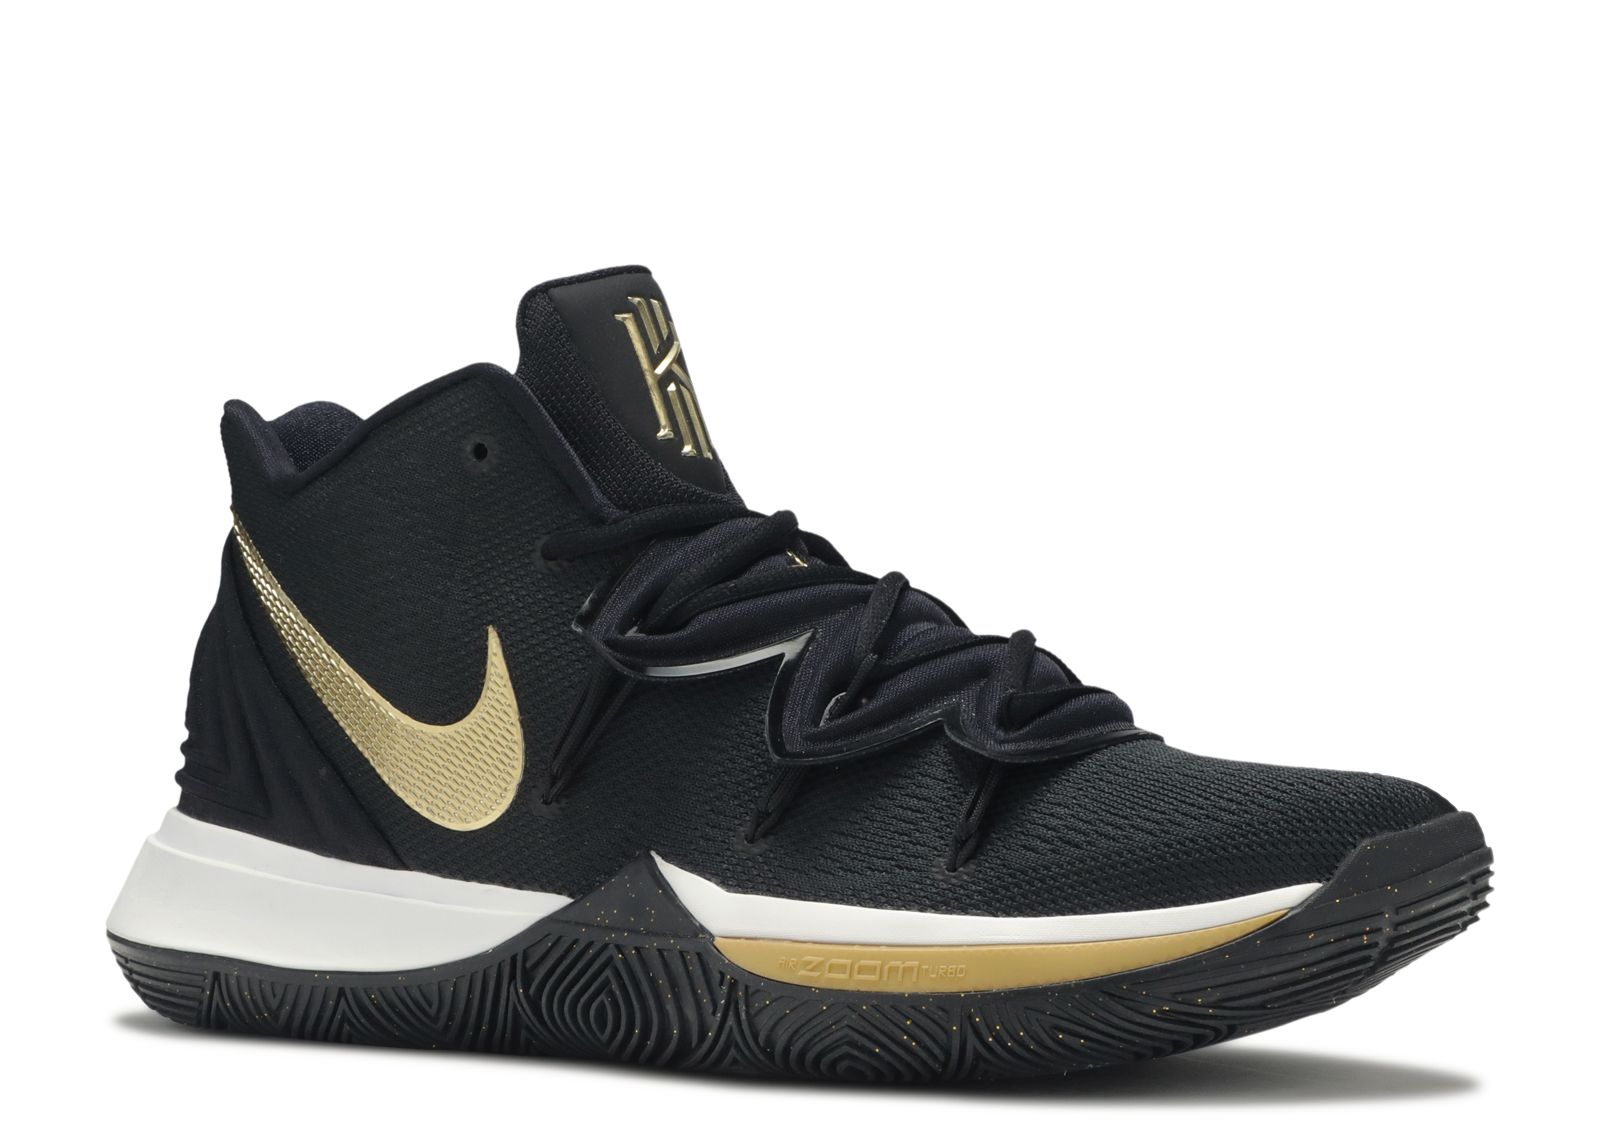 kyrie 5 gold and black